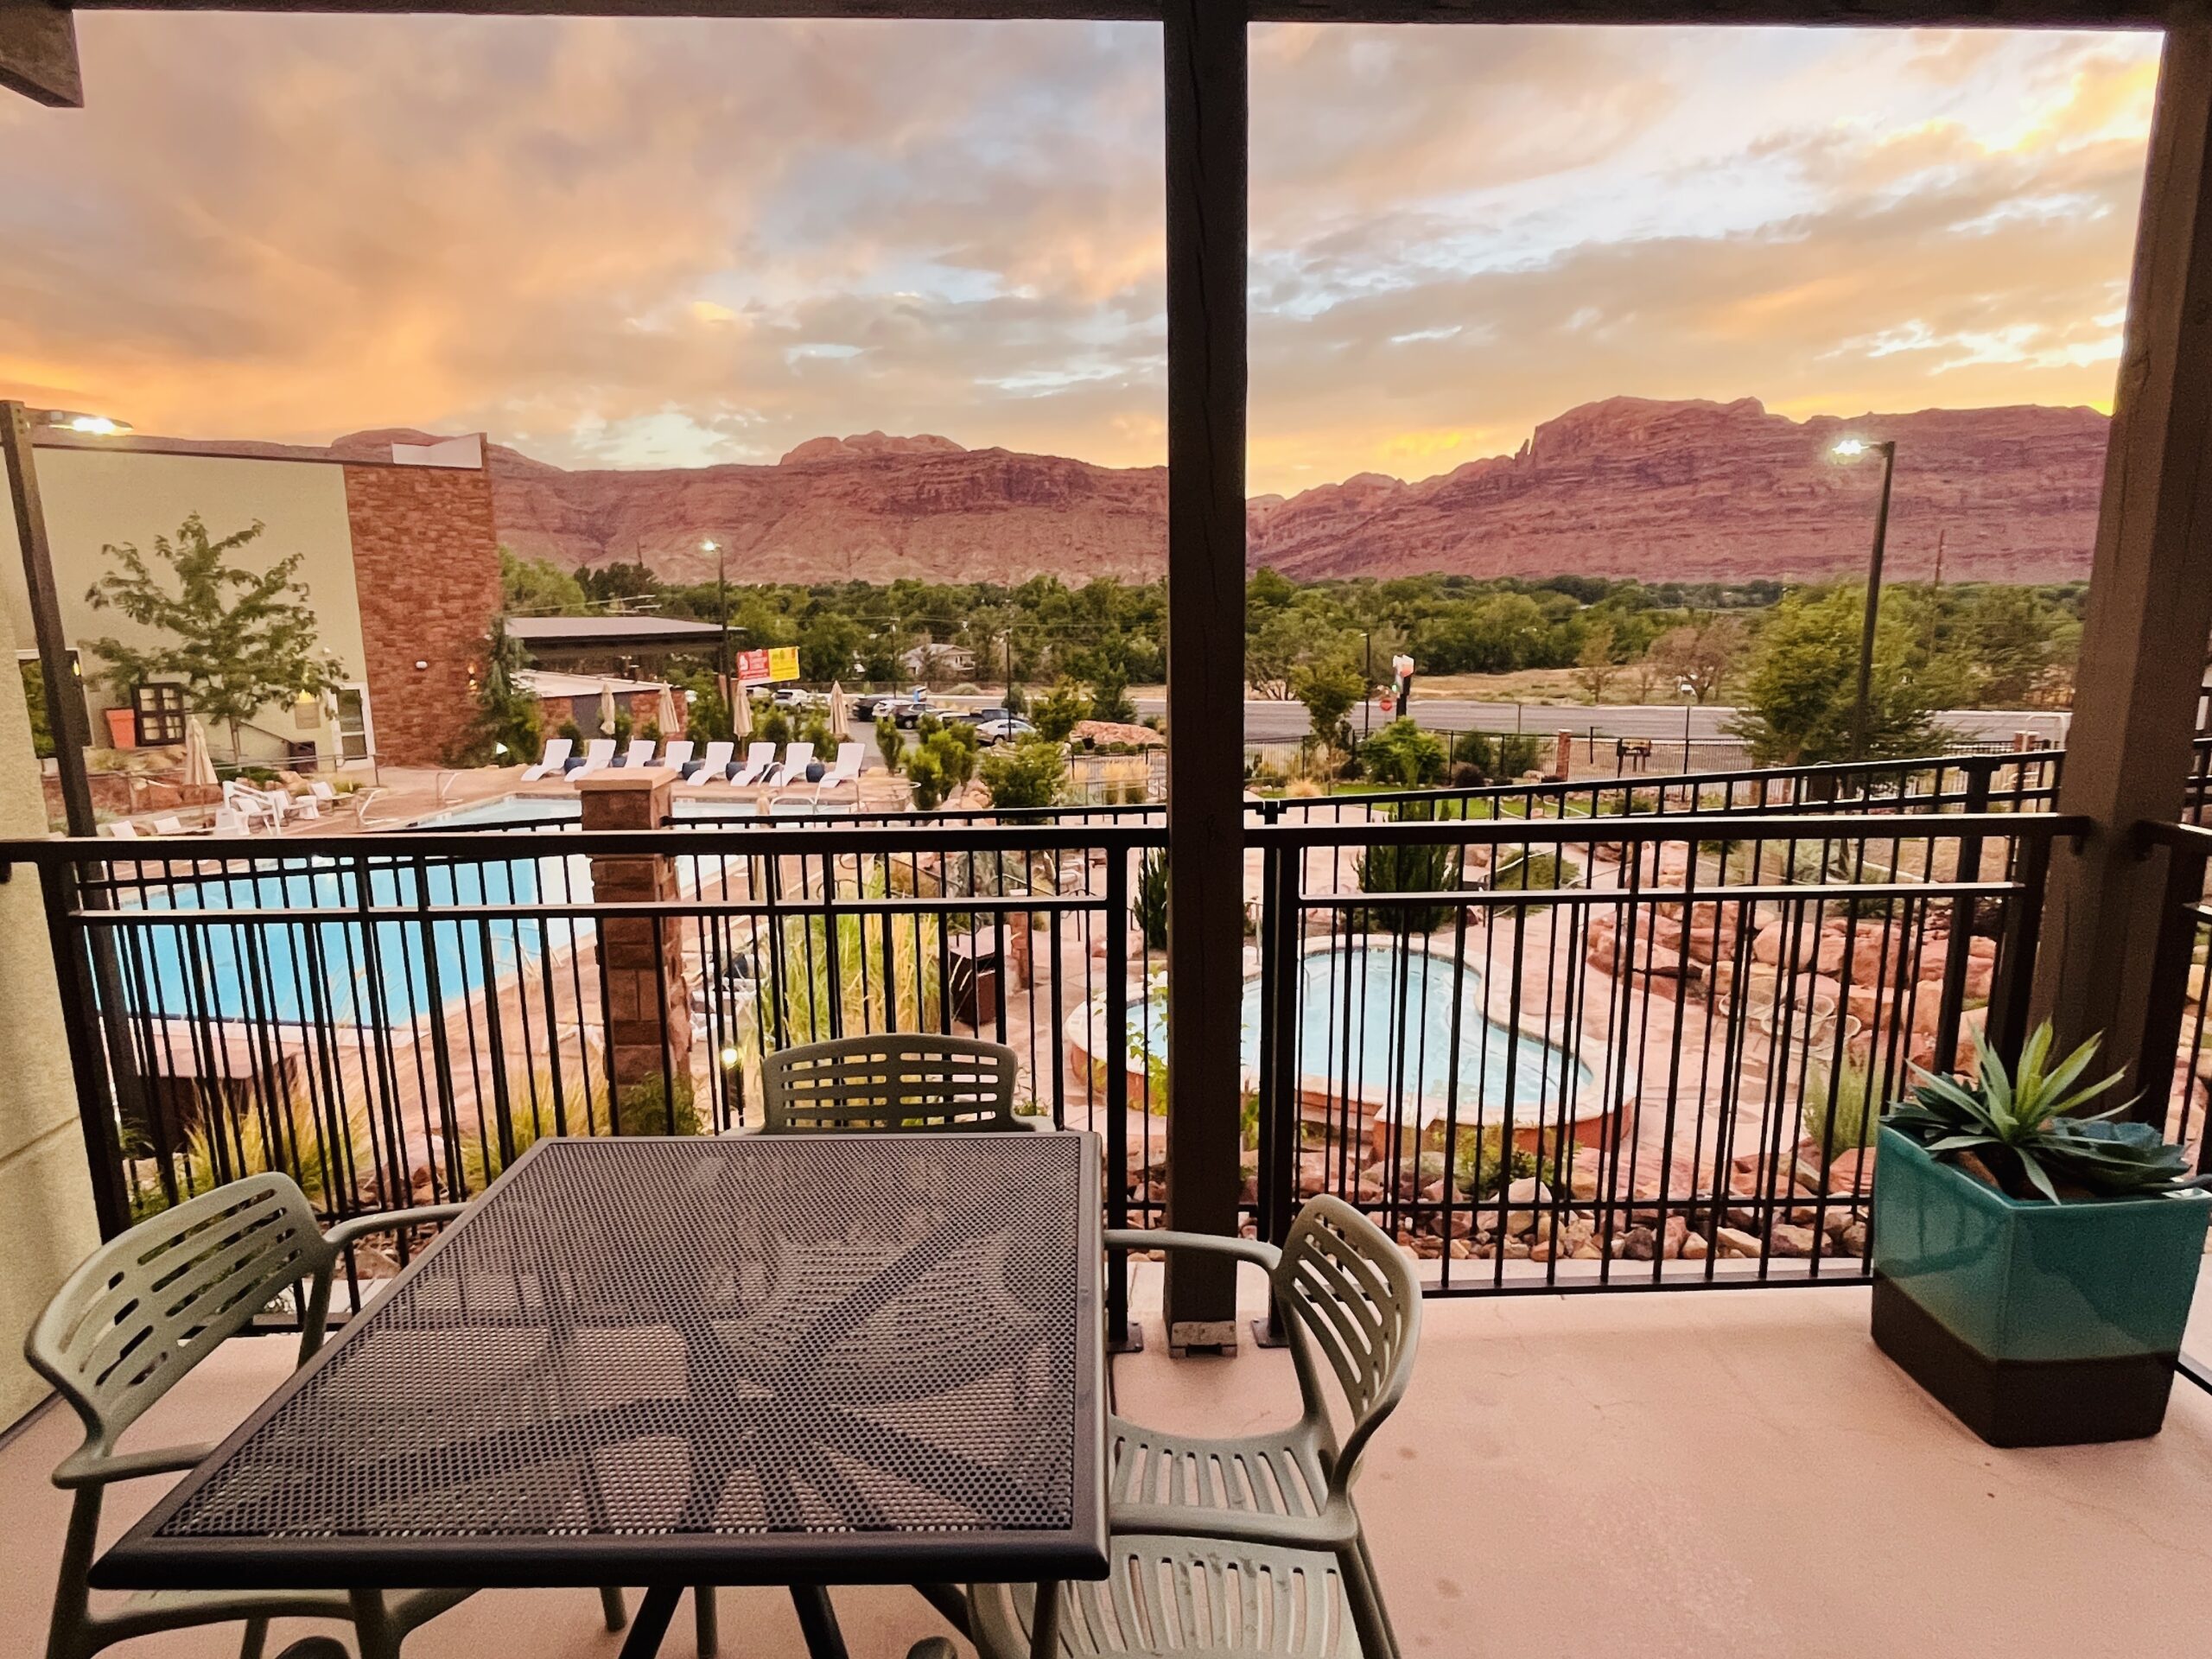 Review Hyatt Globalist Benefits and Upgrades at Hyatt Place Moab